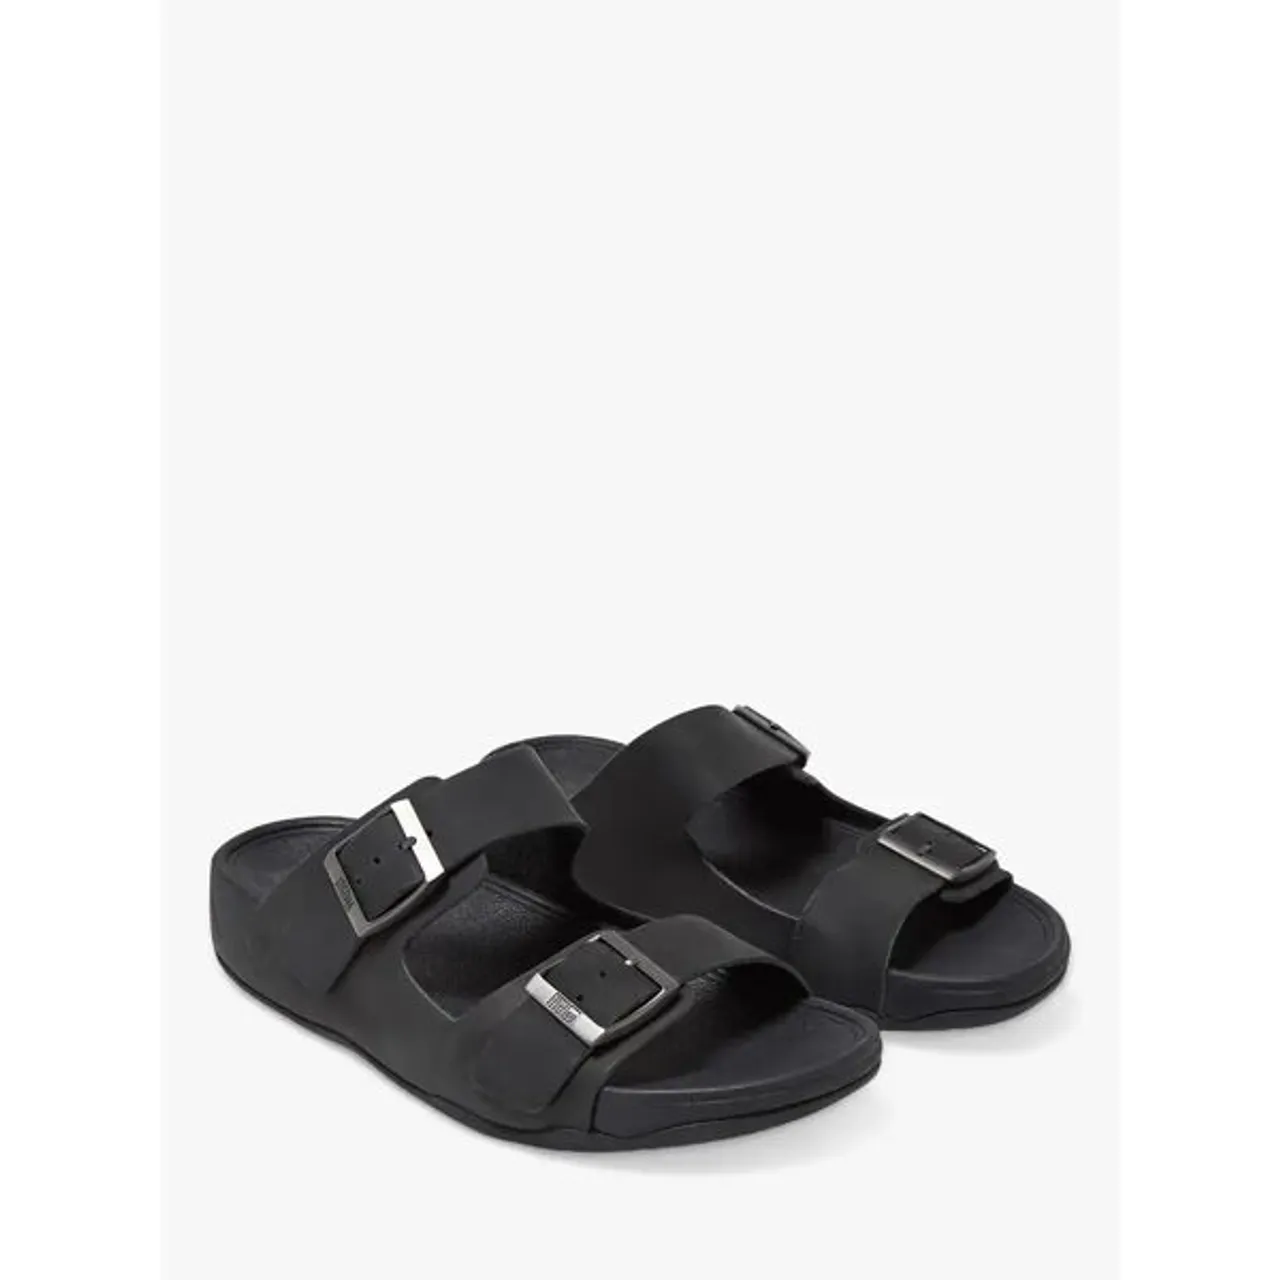 FitFlop Gogh Moc Leather Sliders - Black - Male